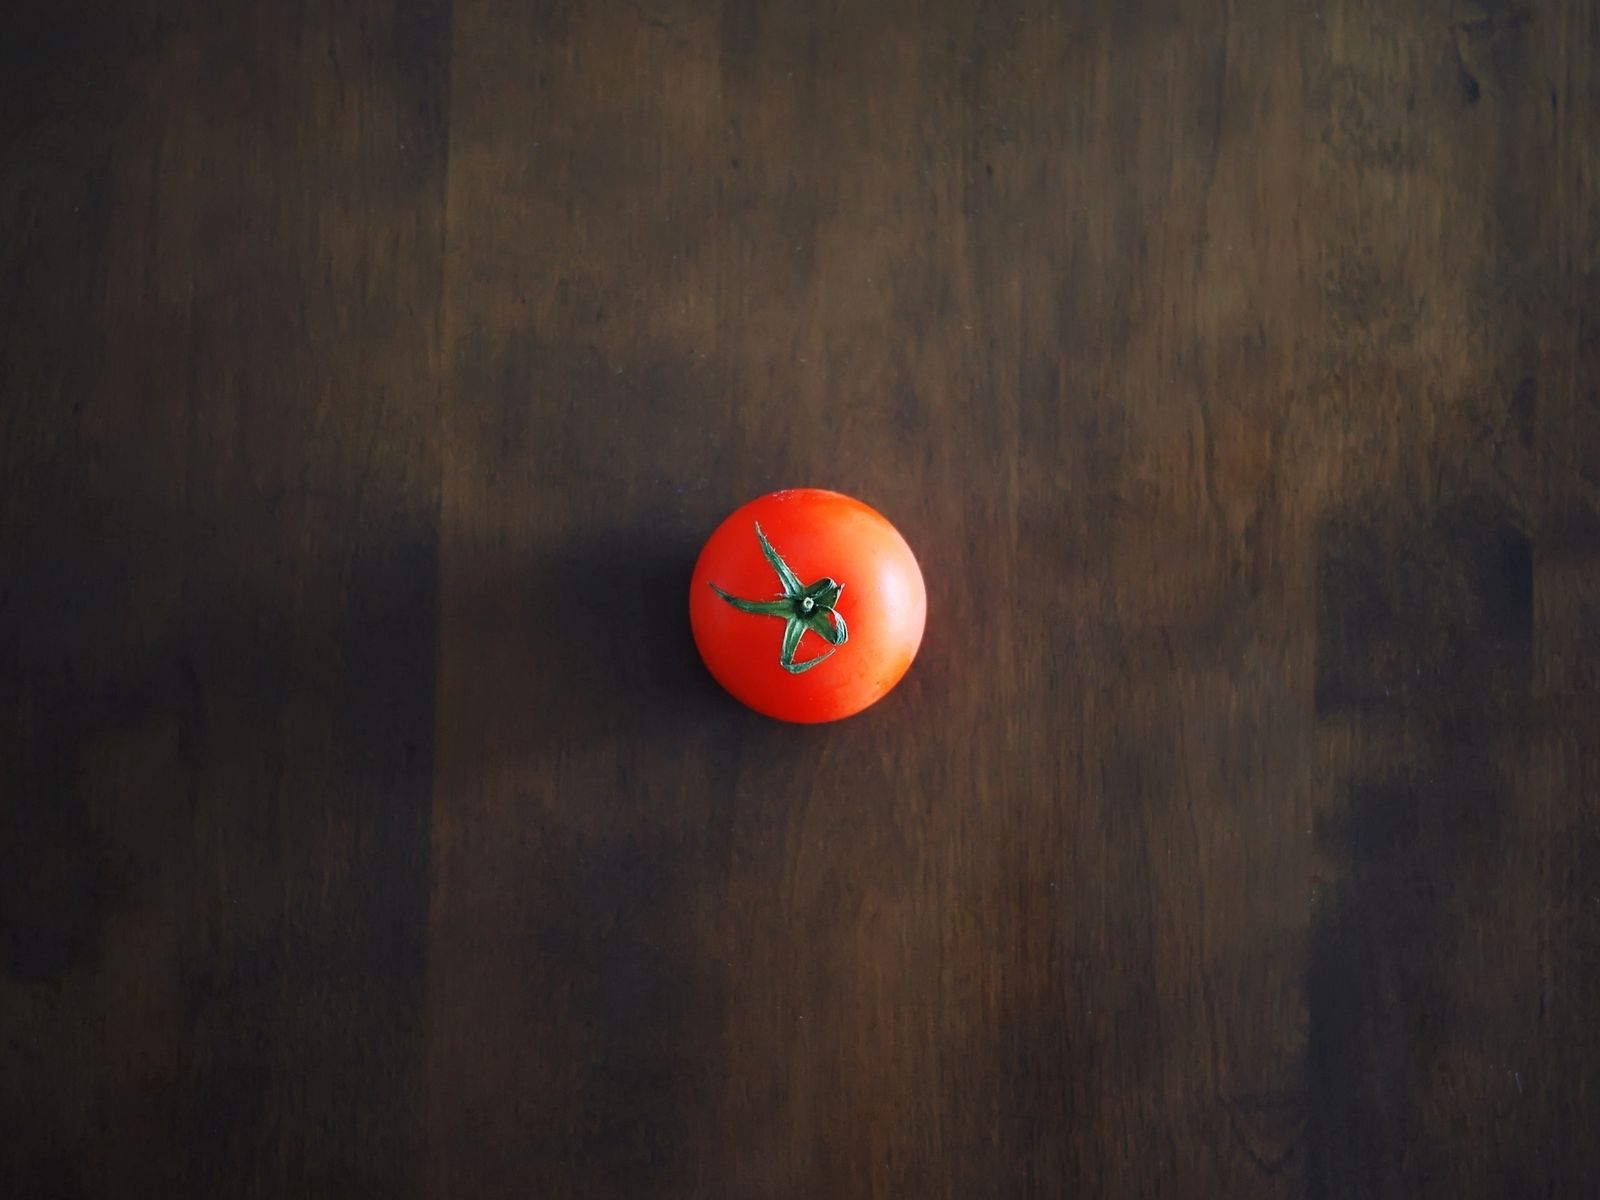 1600x1200 Wallpaper minimalism, tomato, red, table, wall, shadow, background